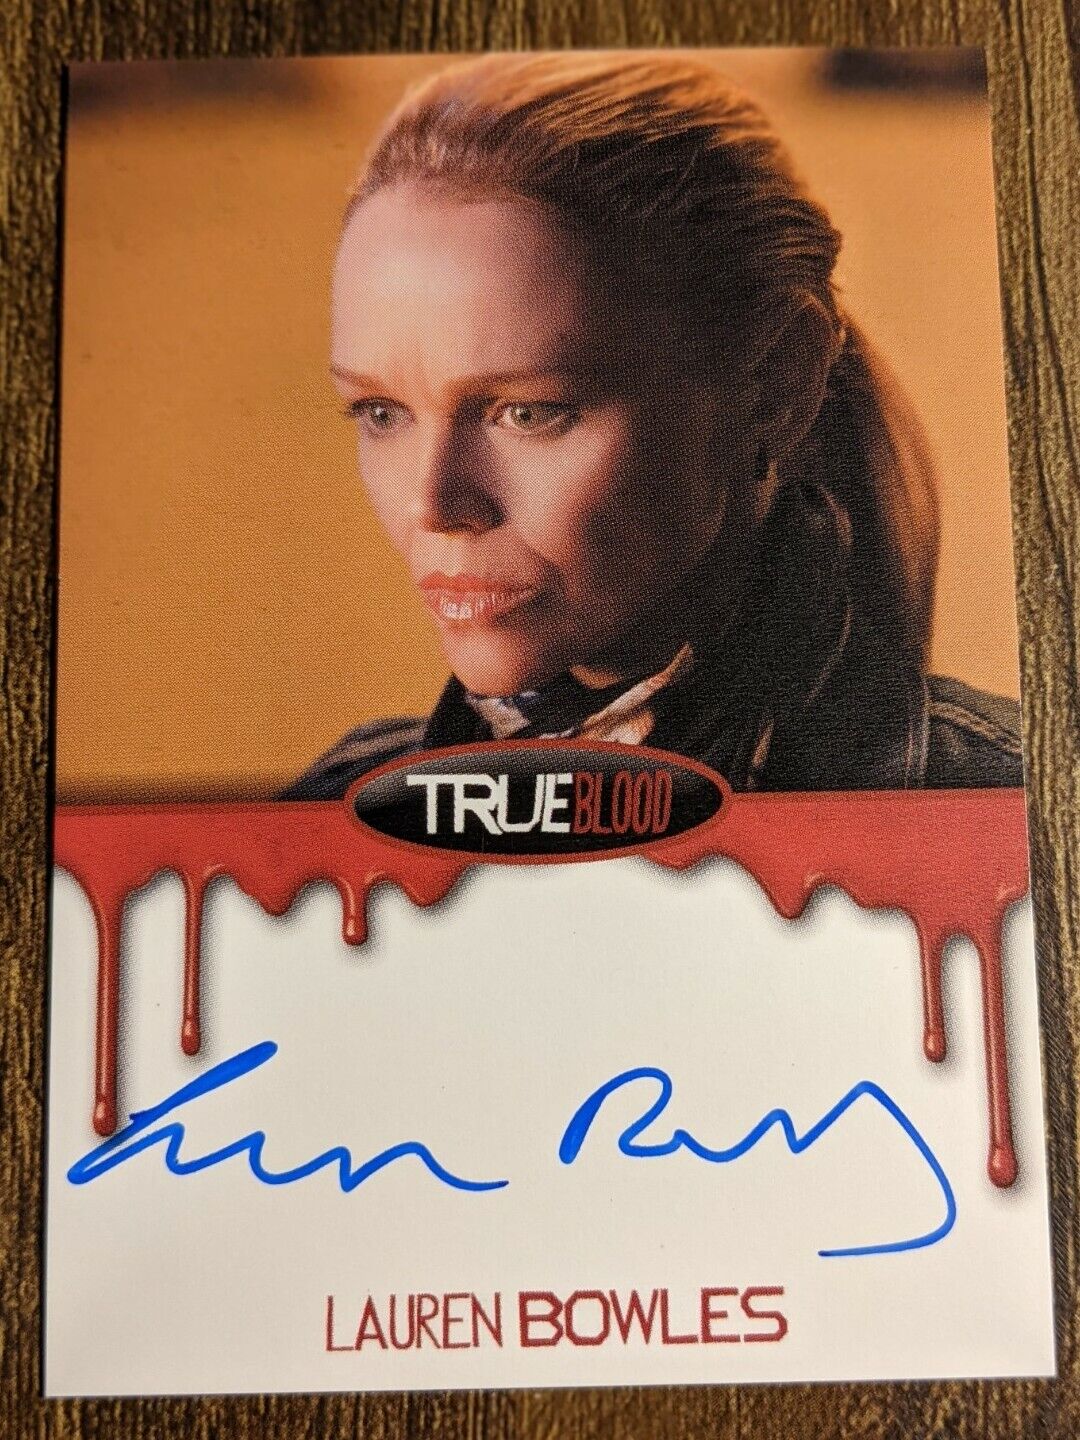 2012 TRUE BLOOD Premiere Ed #18 LAUREN BOWLES Bleed Auto Holly Cleary / SEINFELD